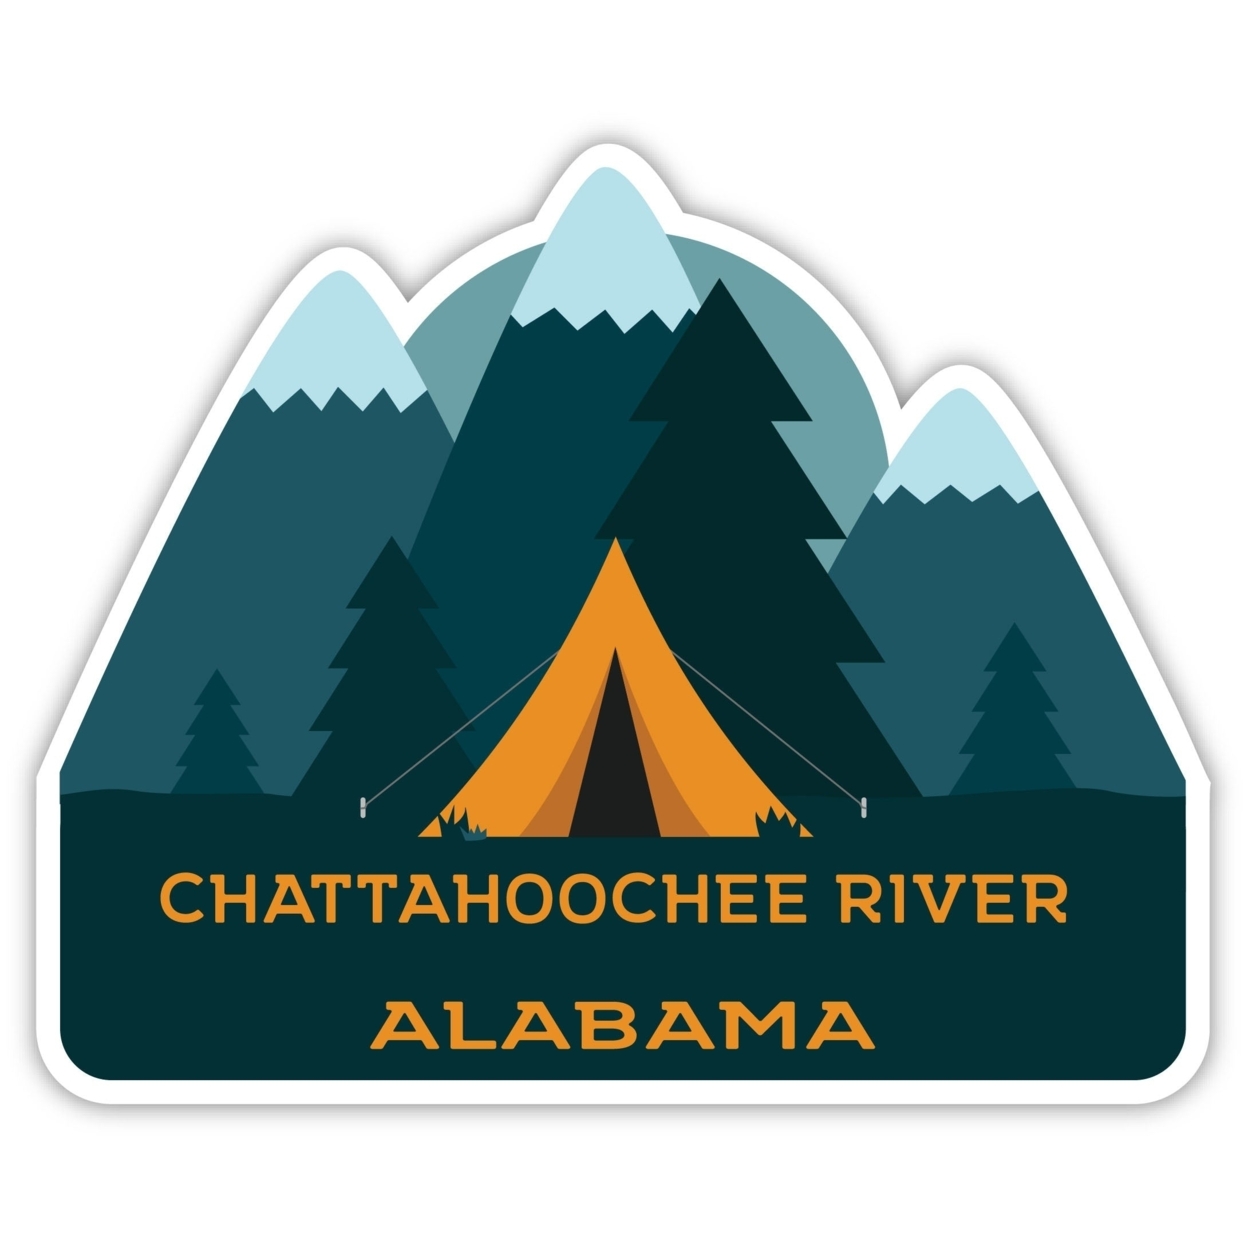 Chattahoochee River Alabama Souvenir Decorative Stickers (Choose Theme And Size) - 4-Pack, 8-Inch, Tent